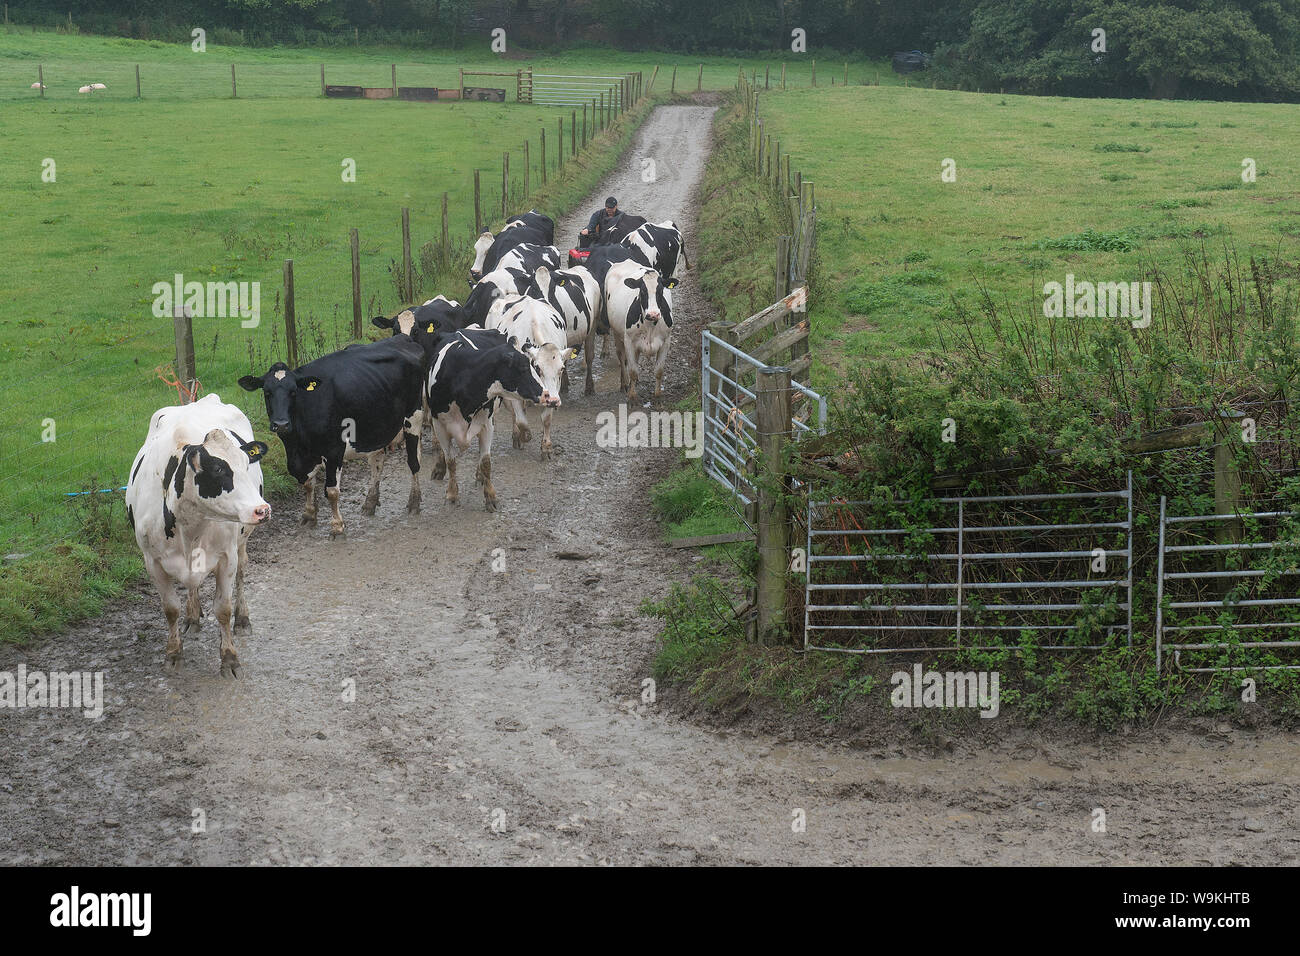 farmer bringing in his cows Stock Photo